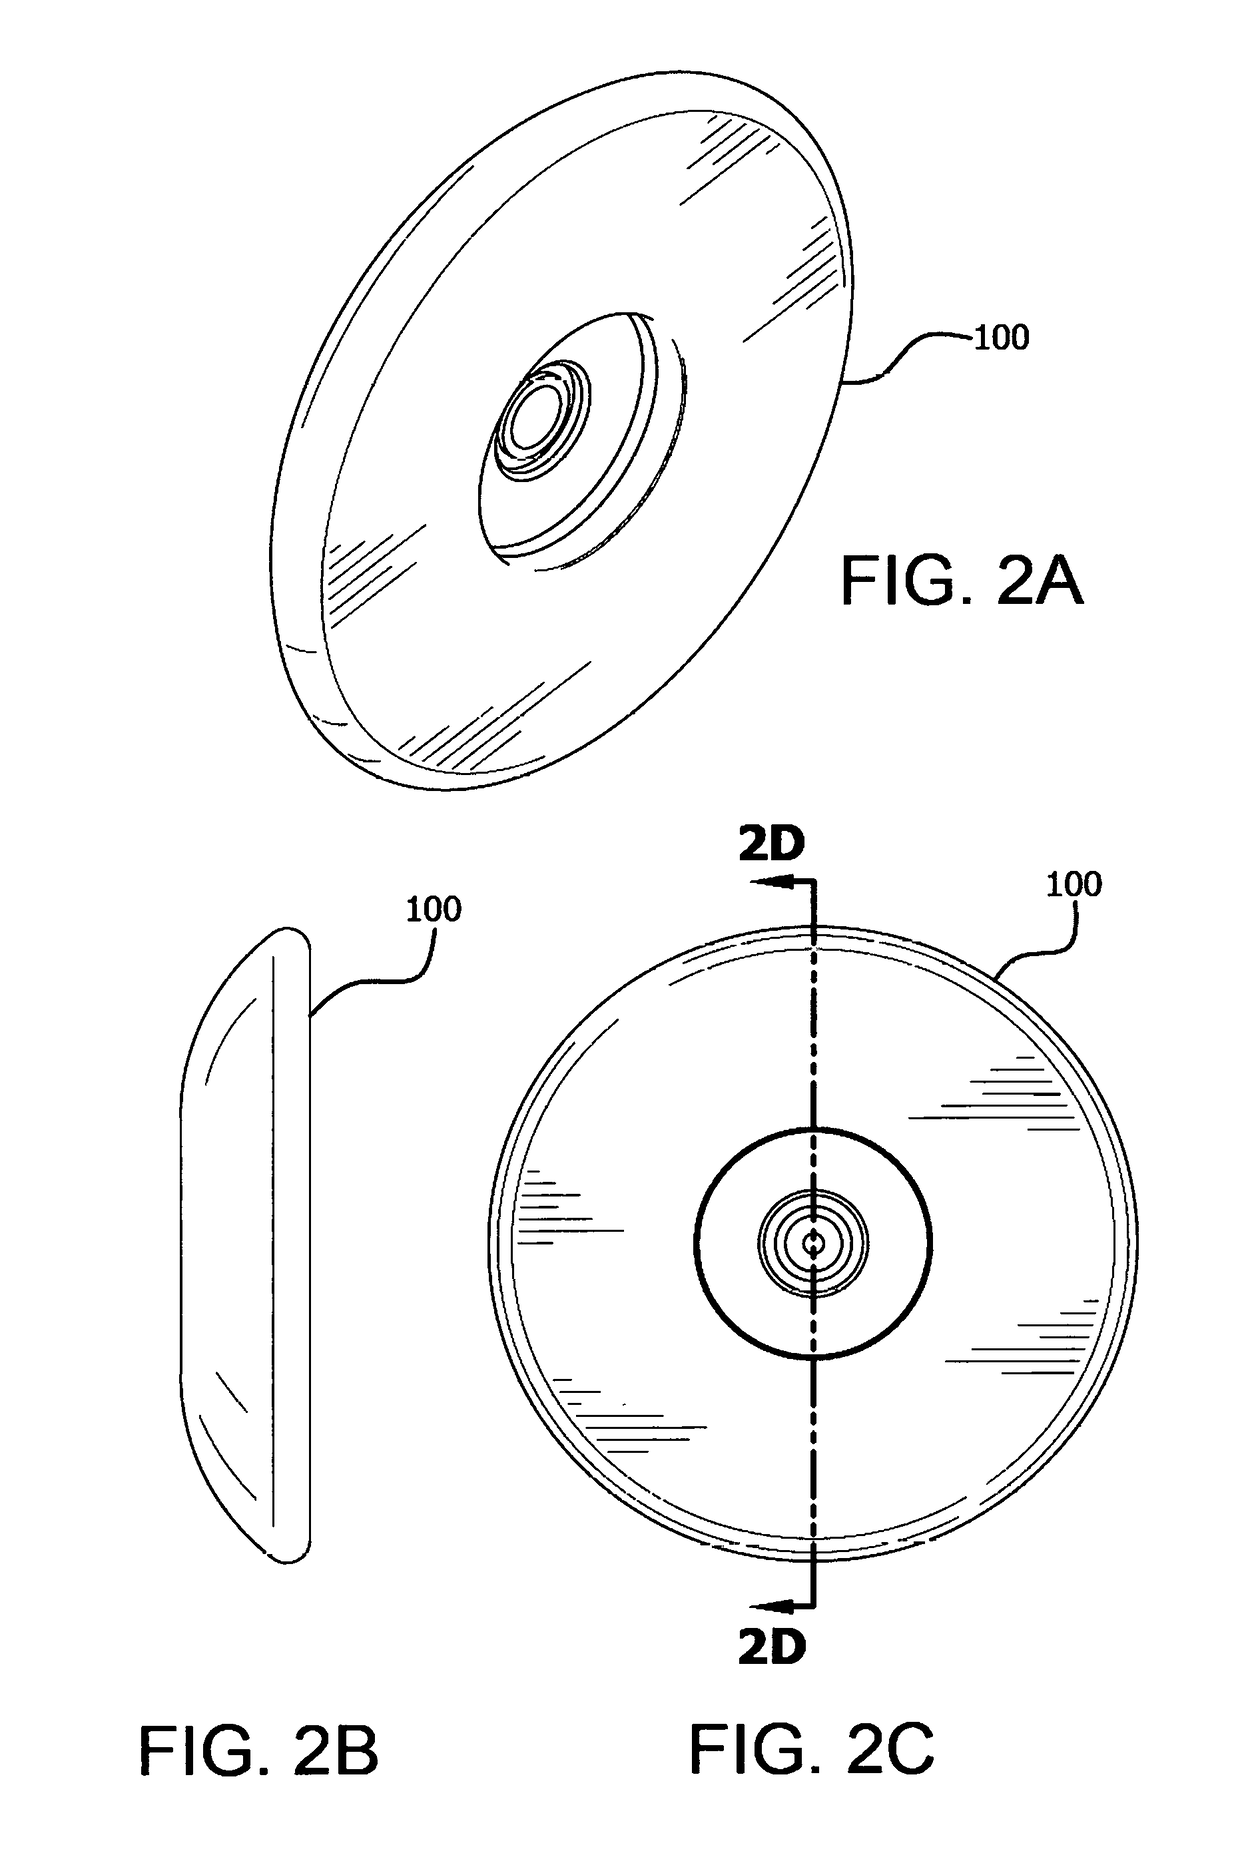 Yo-yo having a magnetically supported bearing yoke integrated with the axle